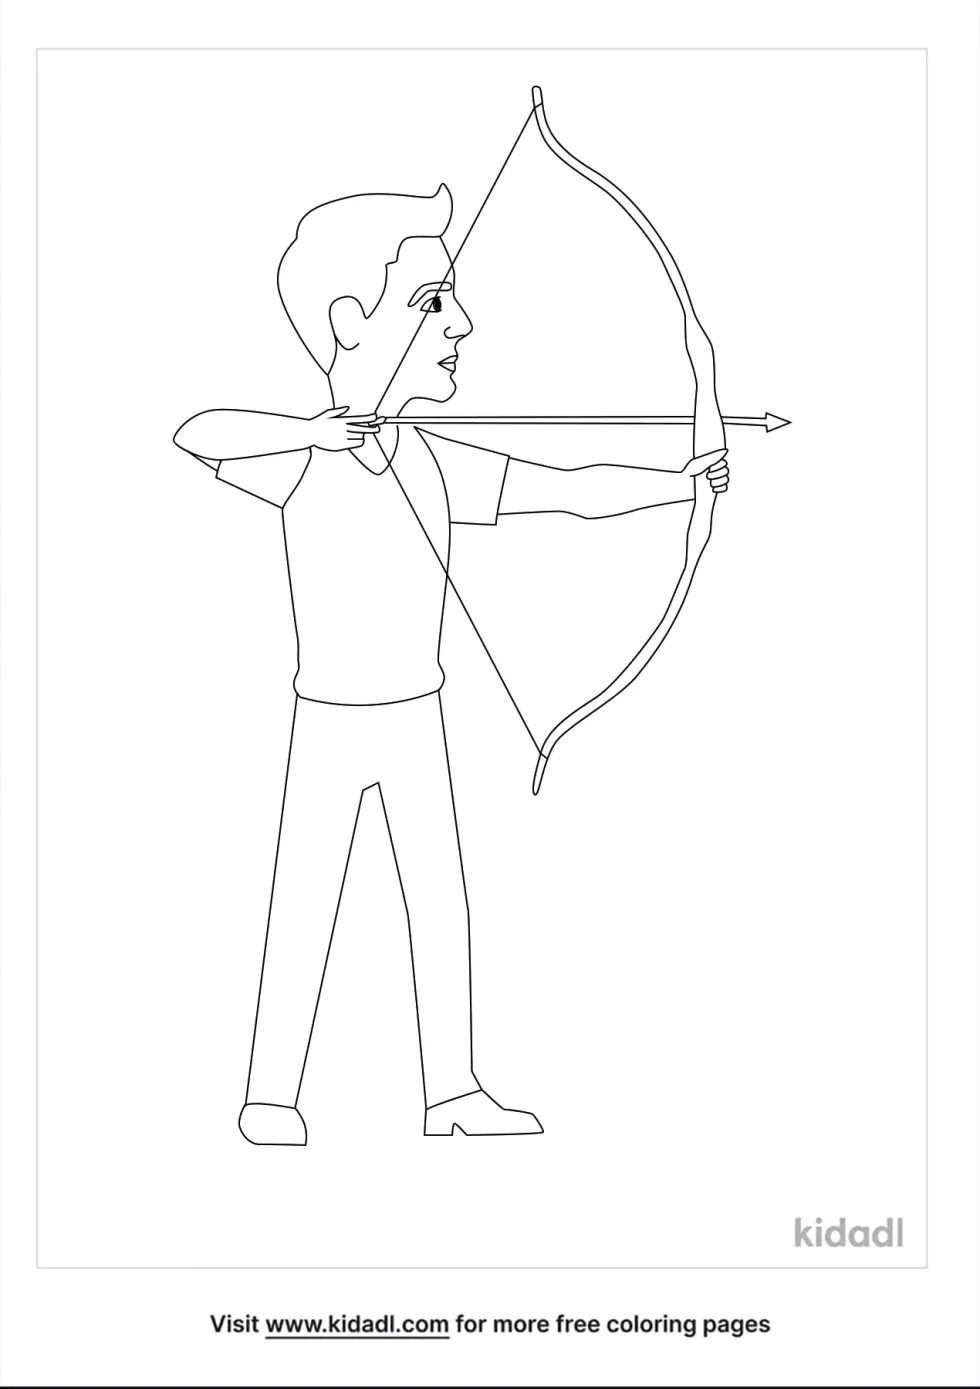 Person Shooting Bow Coloring Page